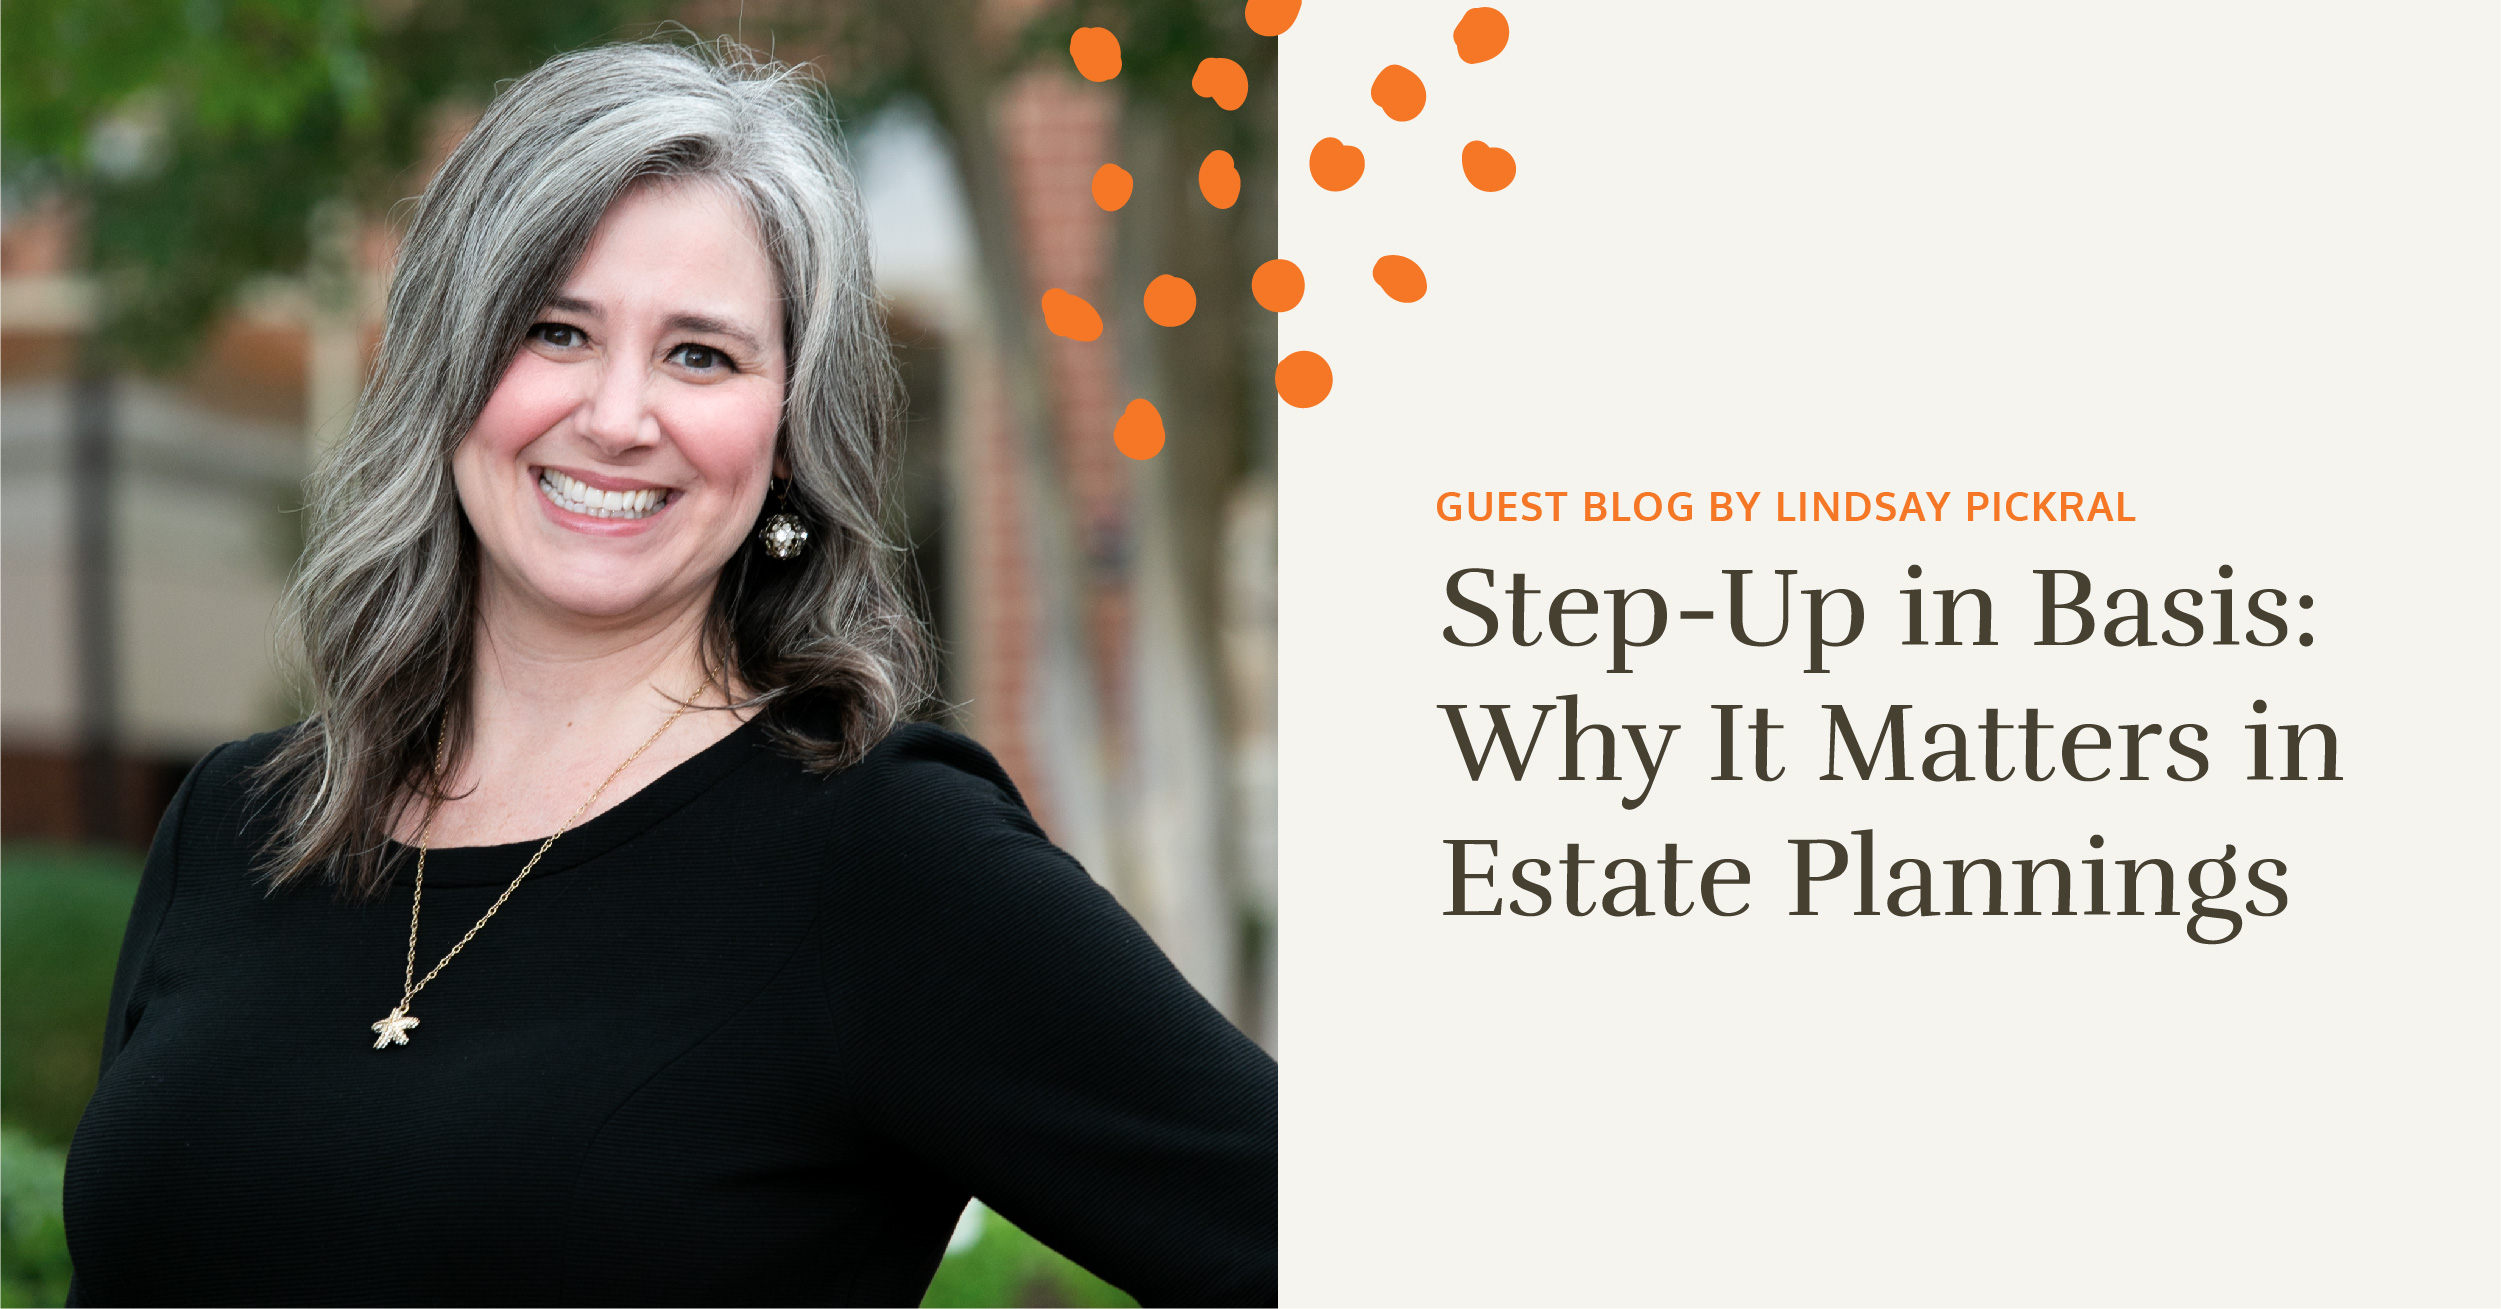 Step-Up in Basis: Why It Matters in Estate Planning